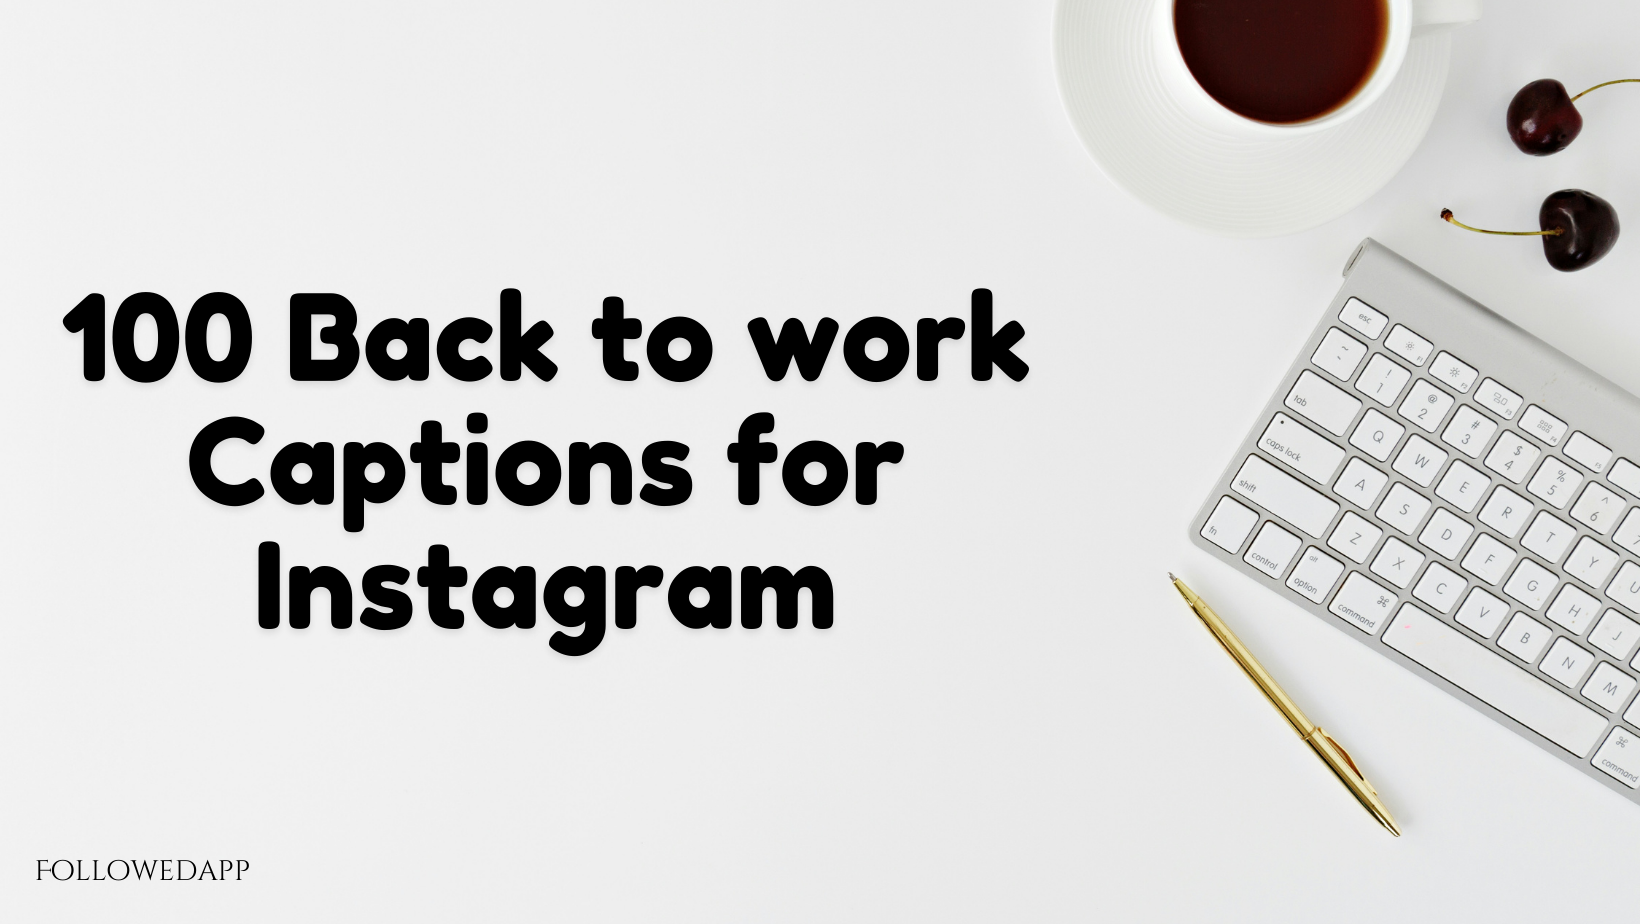 Back to work captions for Instagram